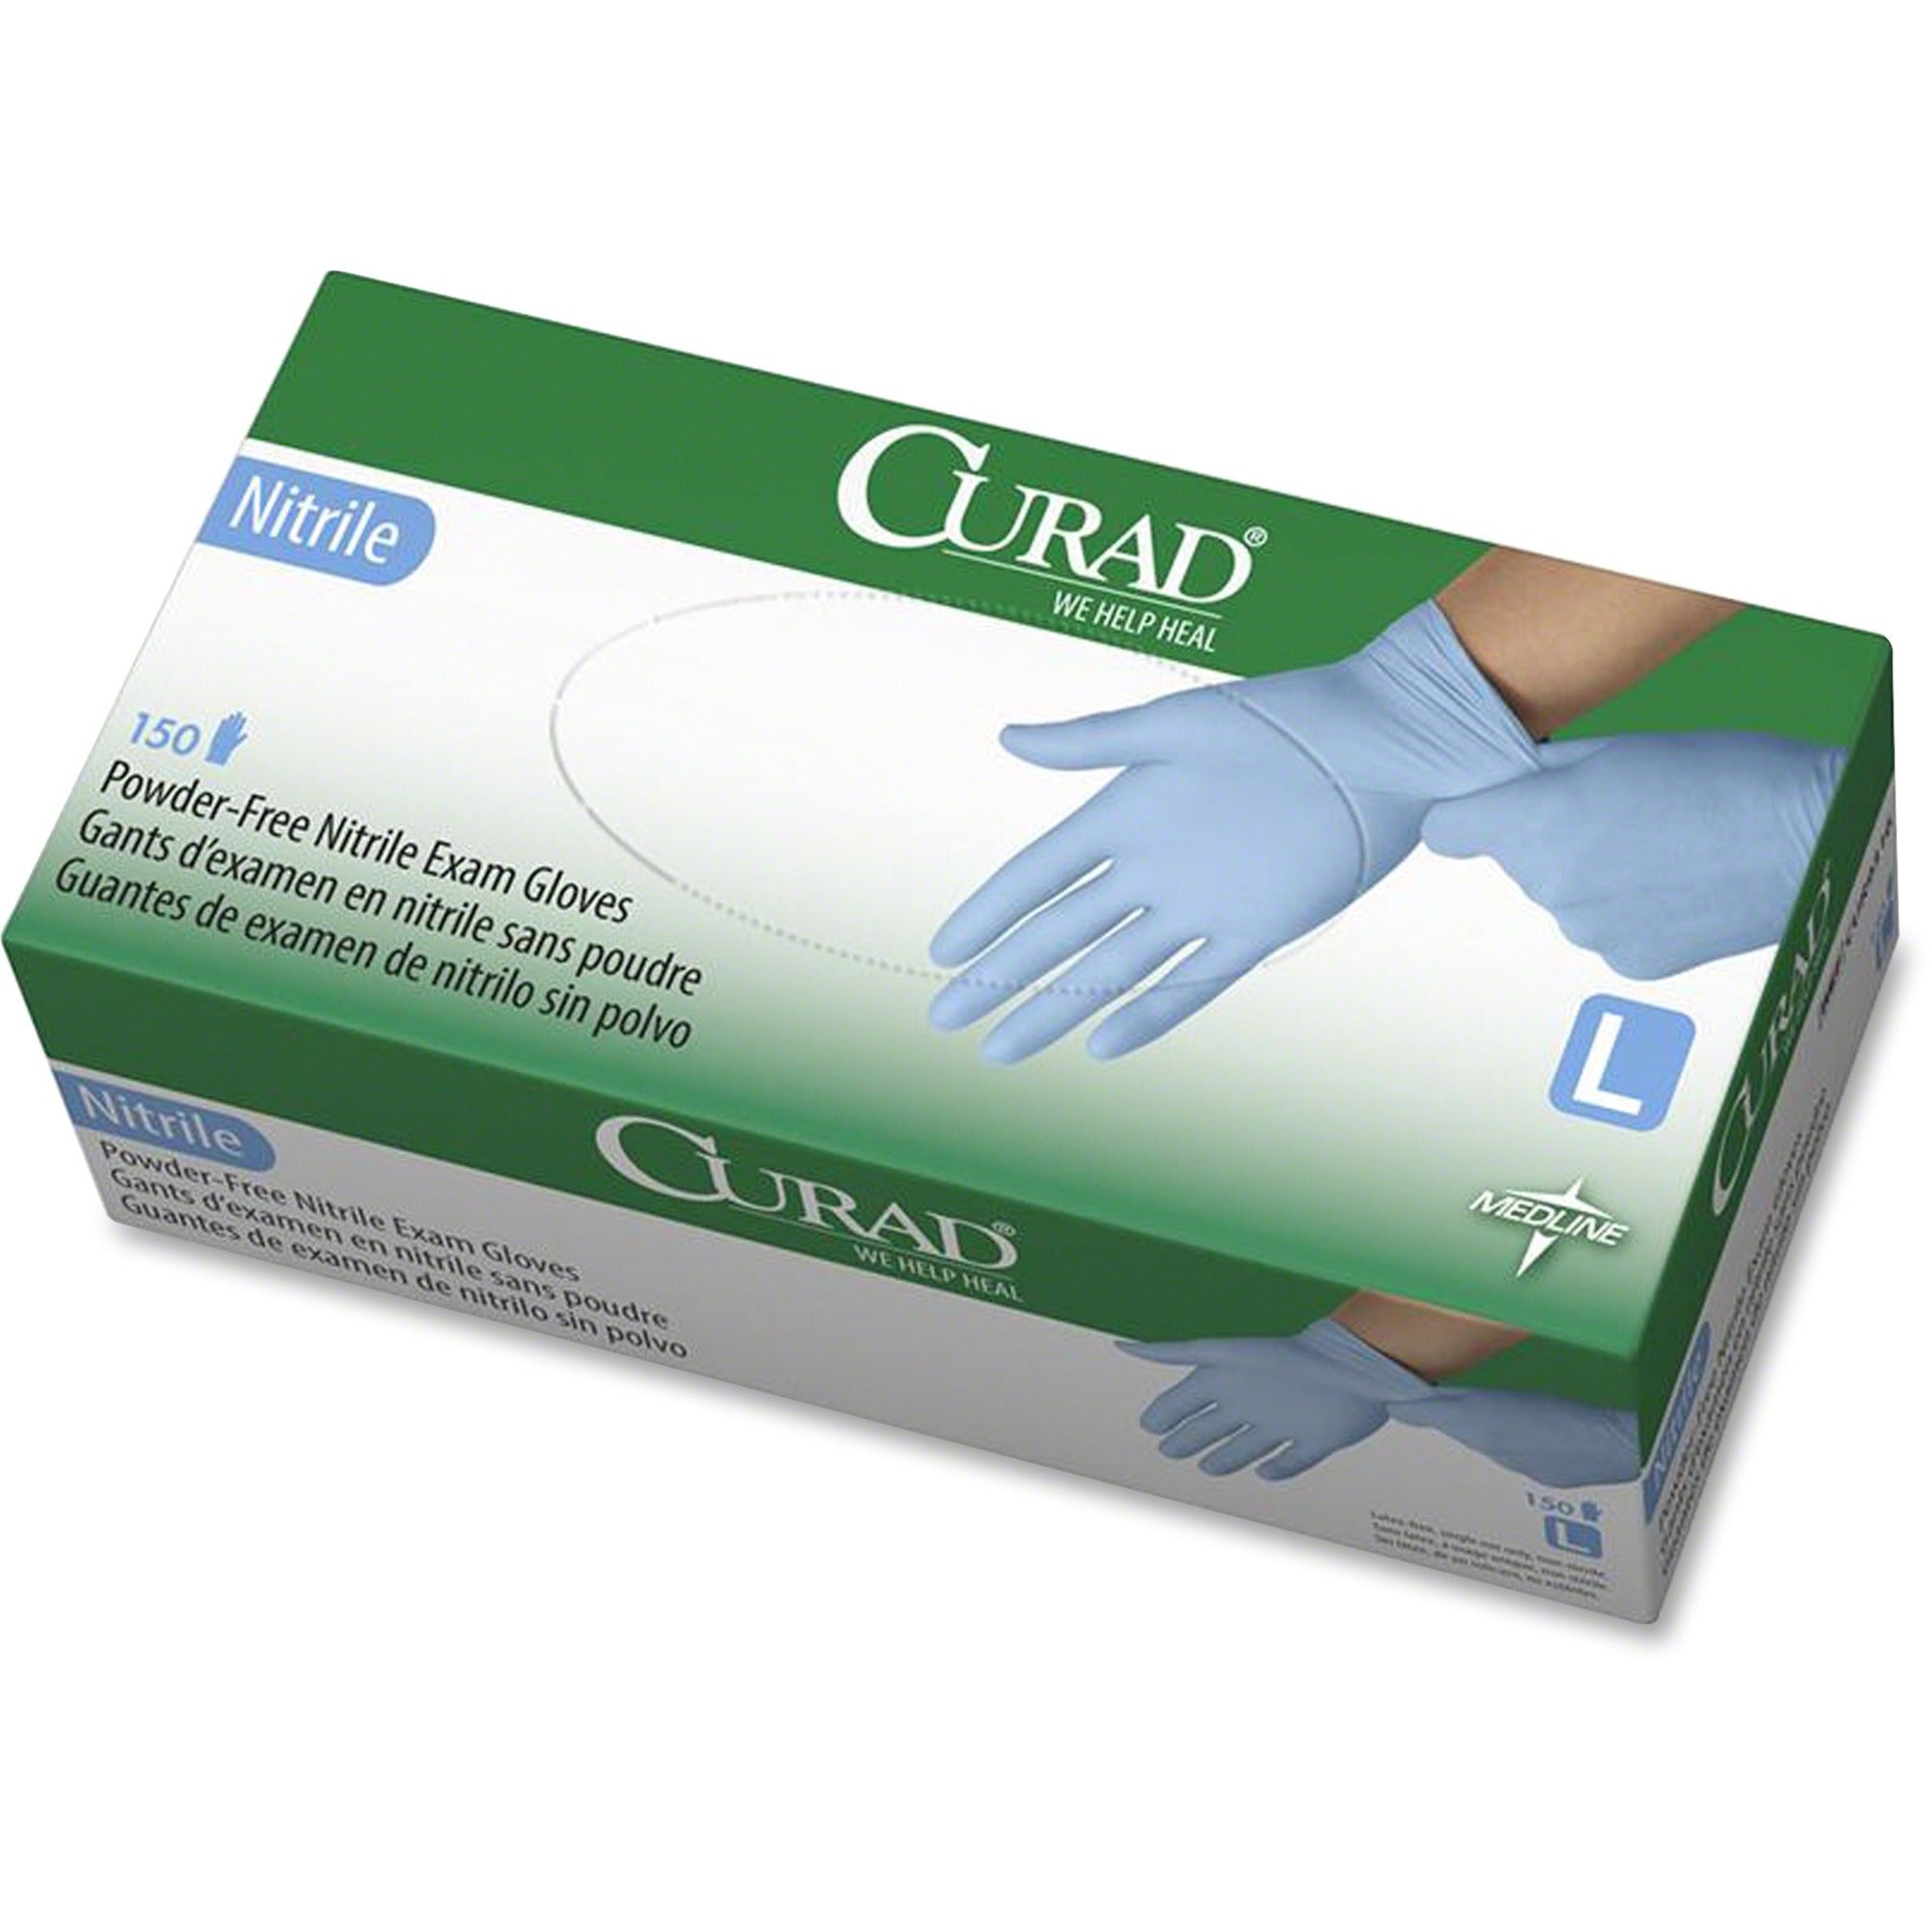 Curad Powder-free Nitrile Disposable Exam Gloves - Large Size - Full-Textured Design - Blue - Latex-free, Non-sterile, Chemical Resistant - For Medical - 150 / Box - 9.50" Glove Length - 